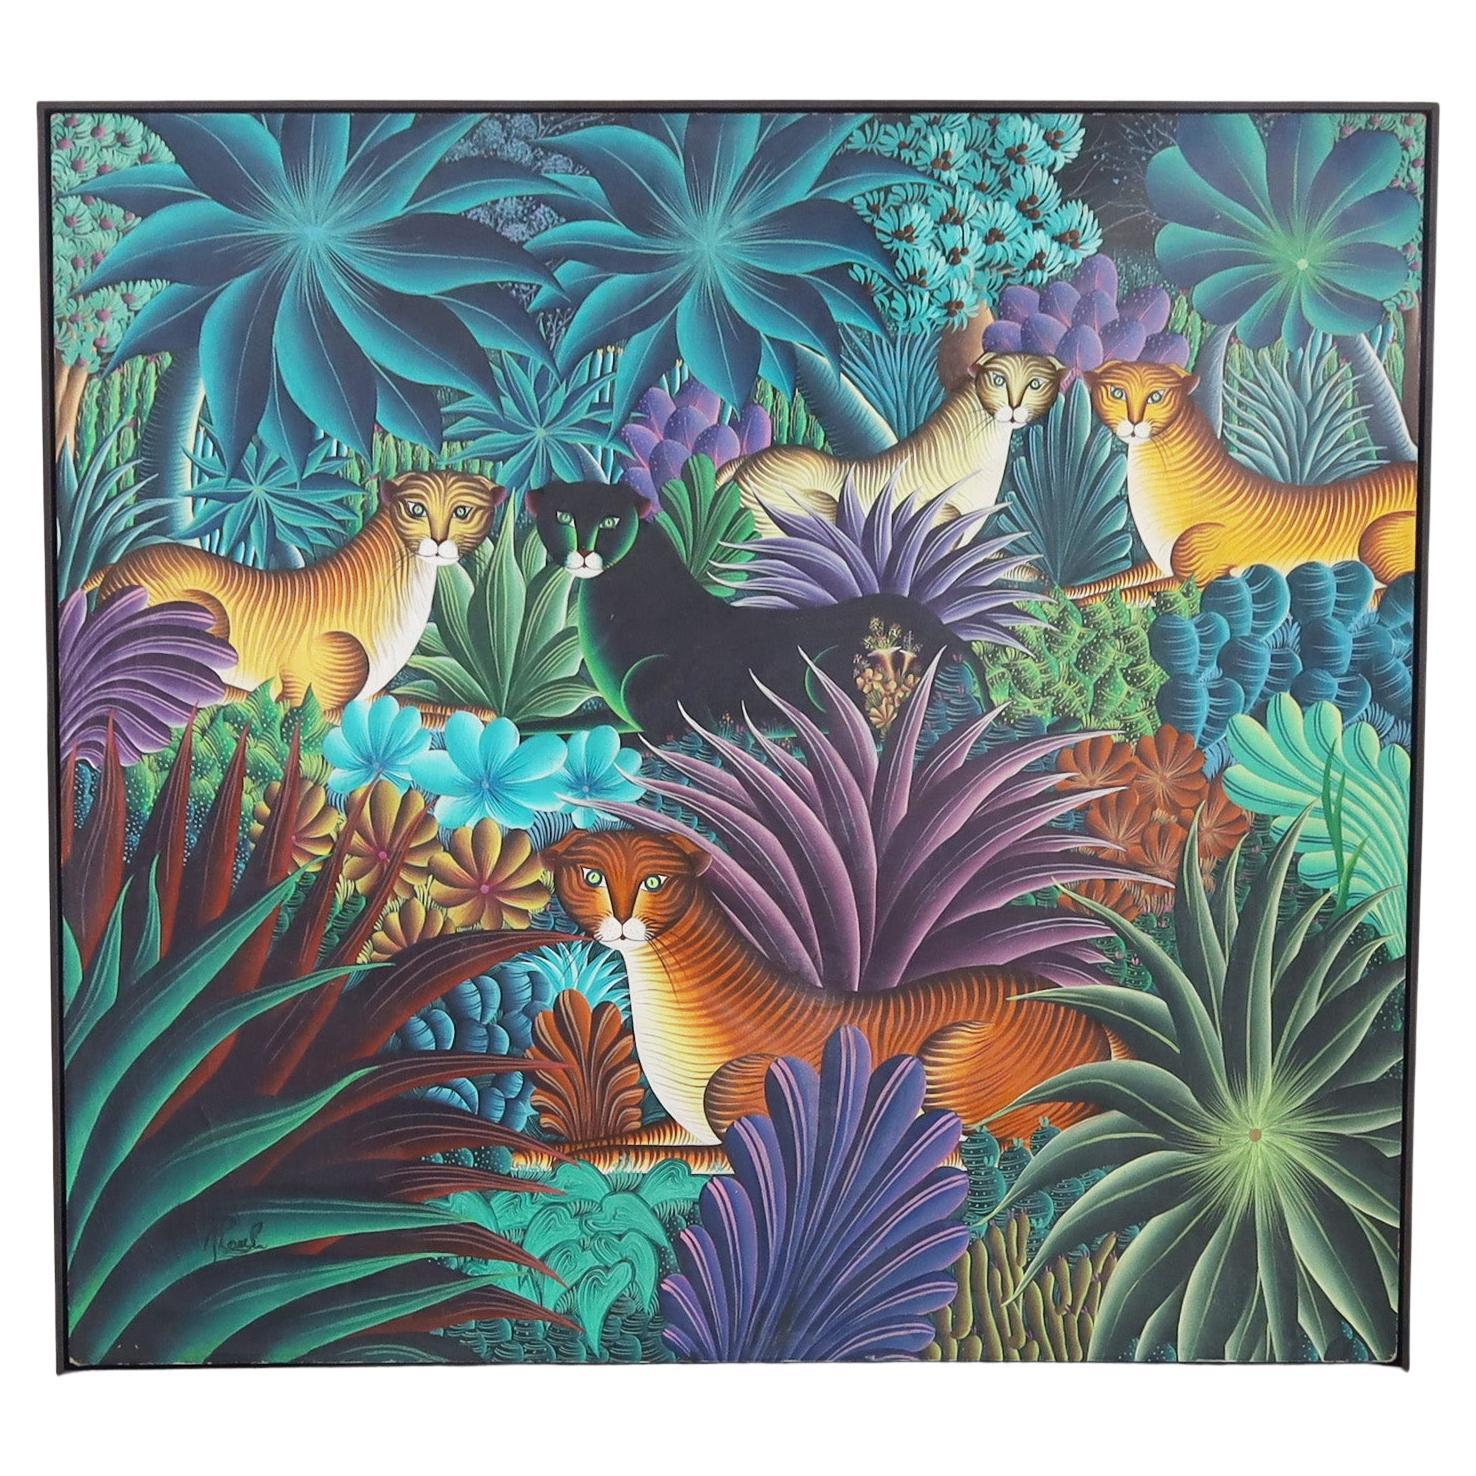 Painting on Canvas of Cats in a Jungle For Sale